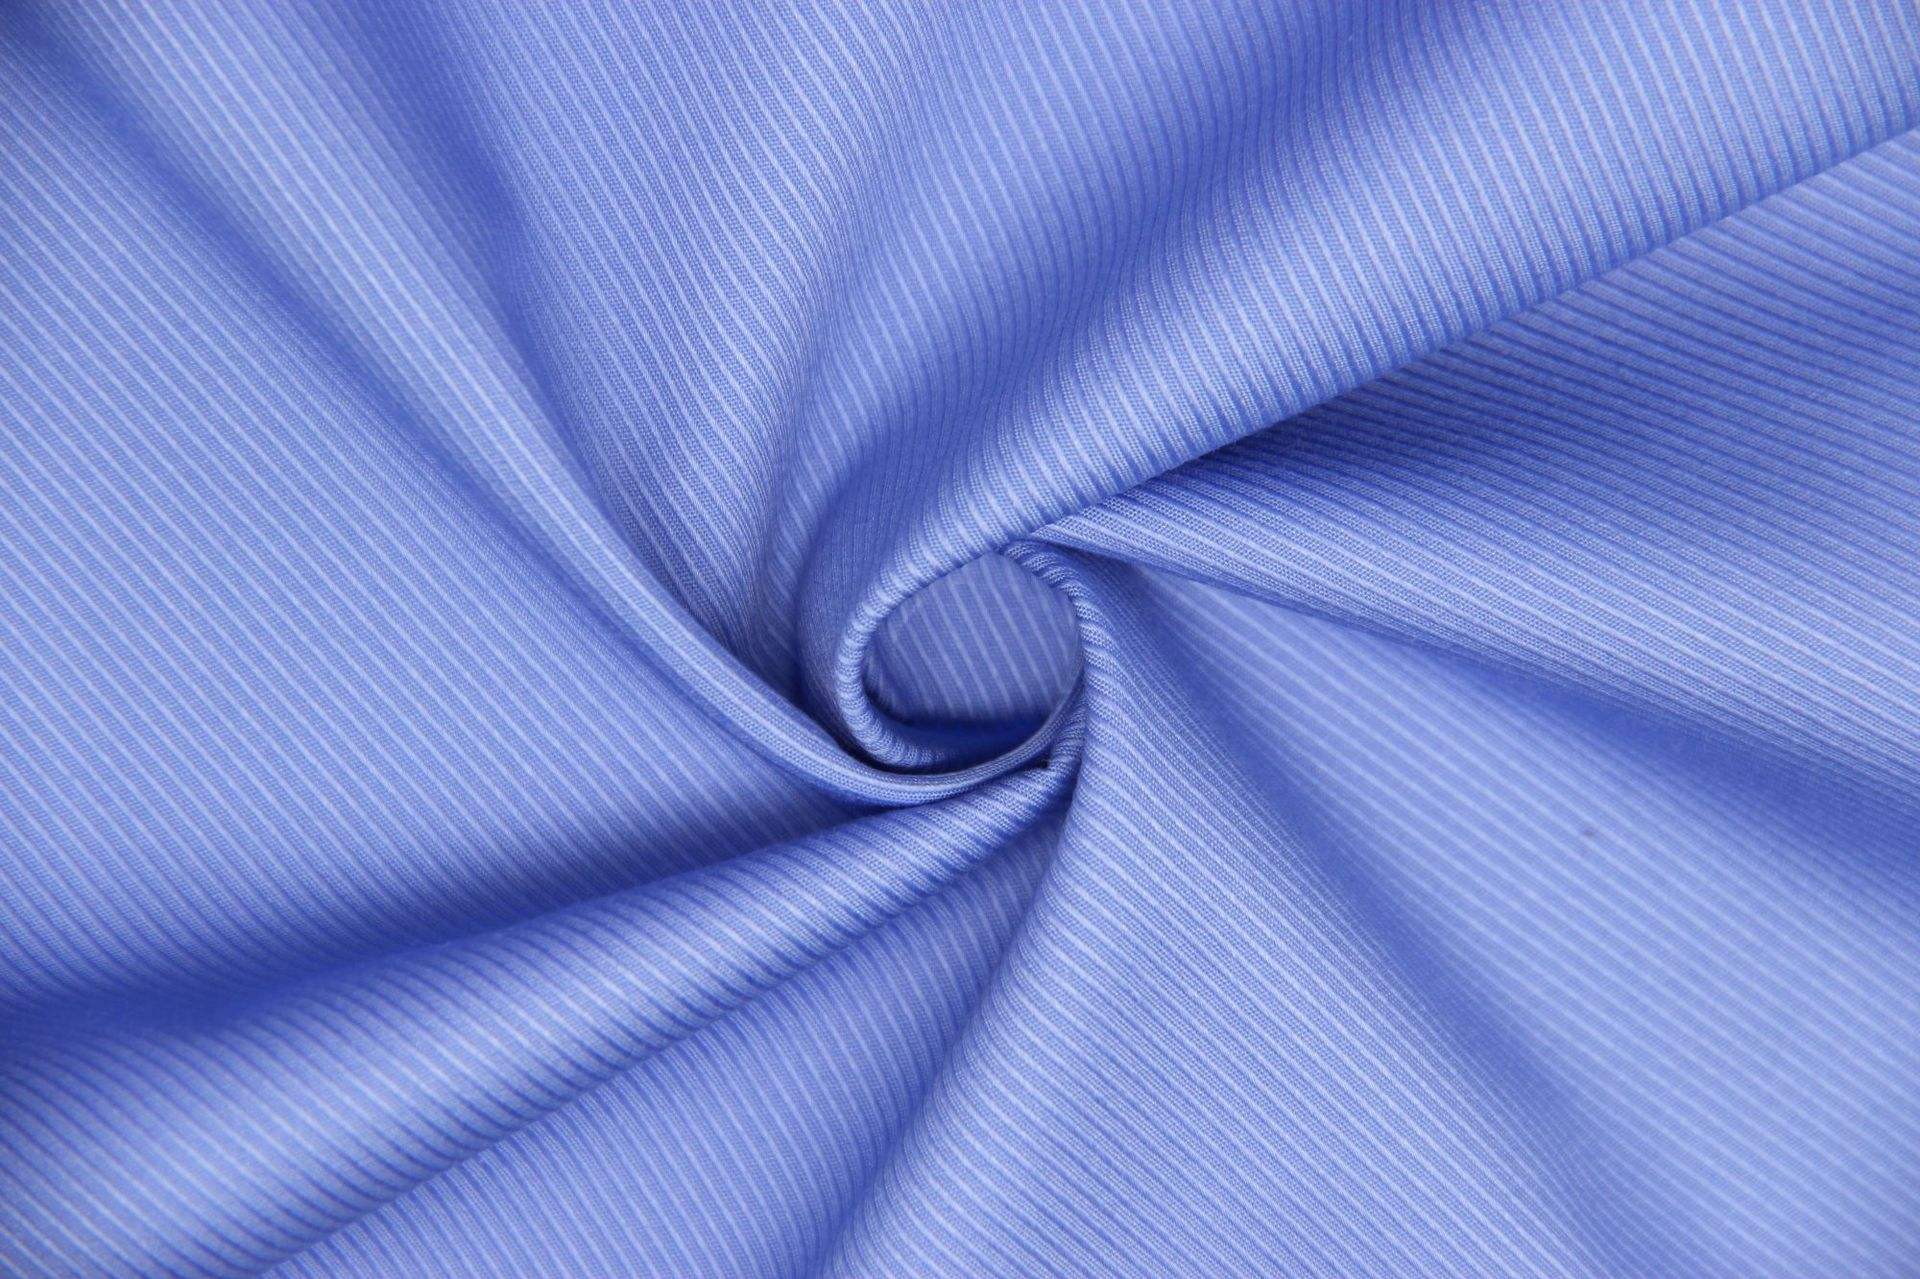 Polyester cotton